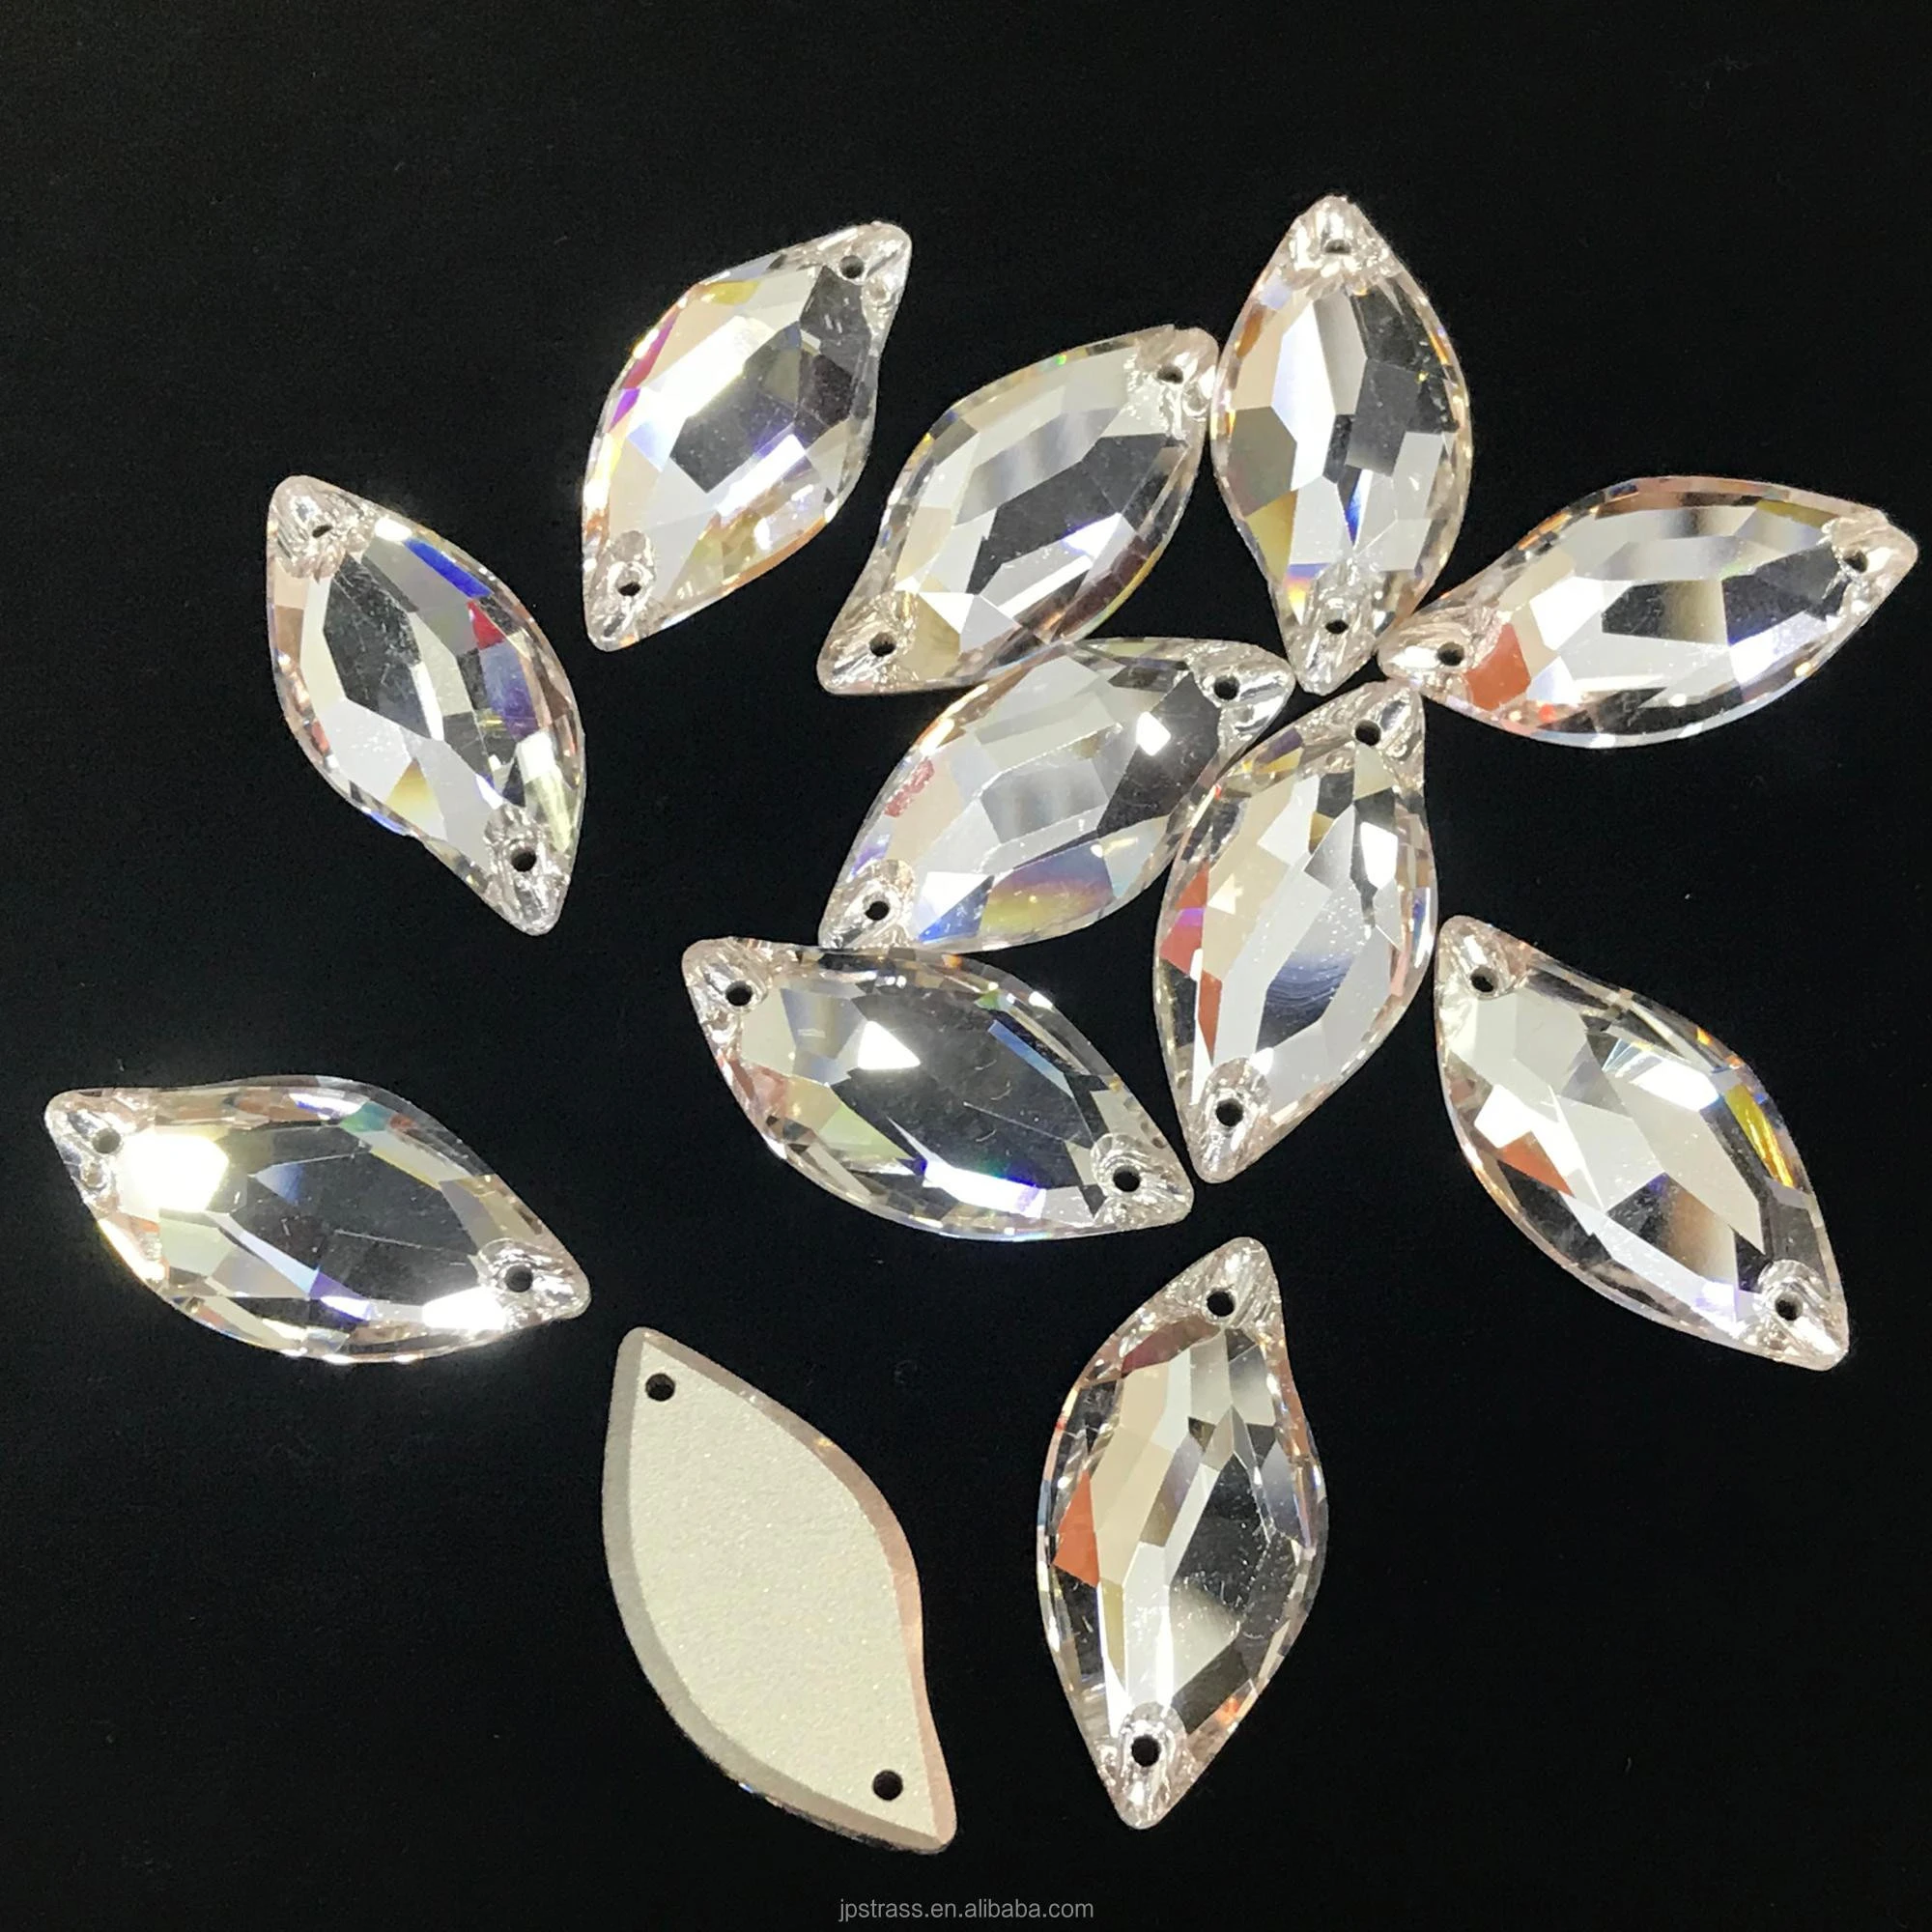 Fancy sewing square shape wholesale crystal ab sew on glass bead for necklace,glass diamond with holes making wedding dresses